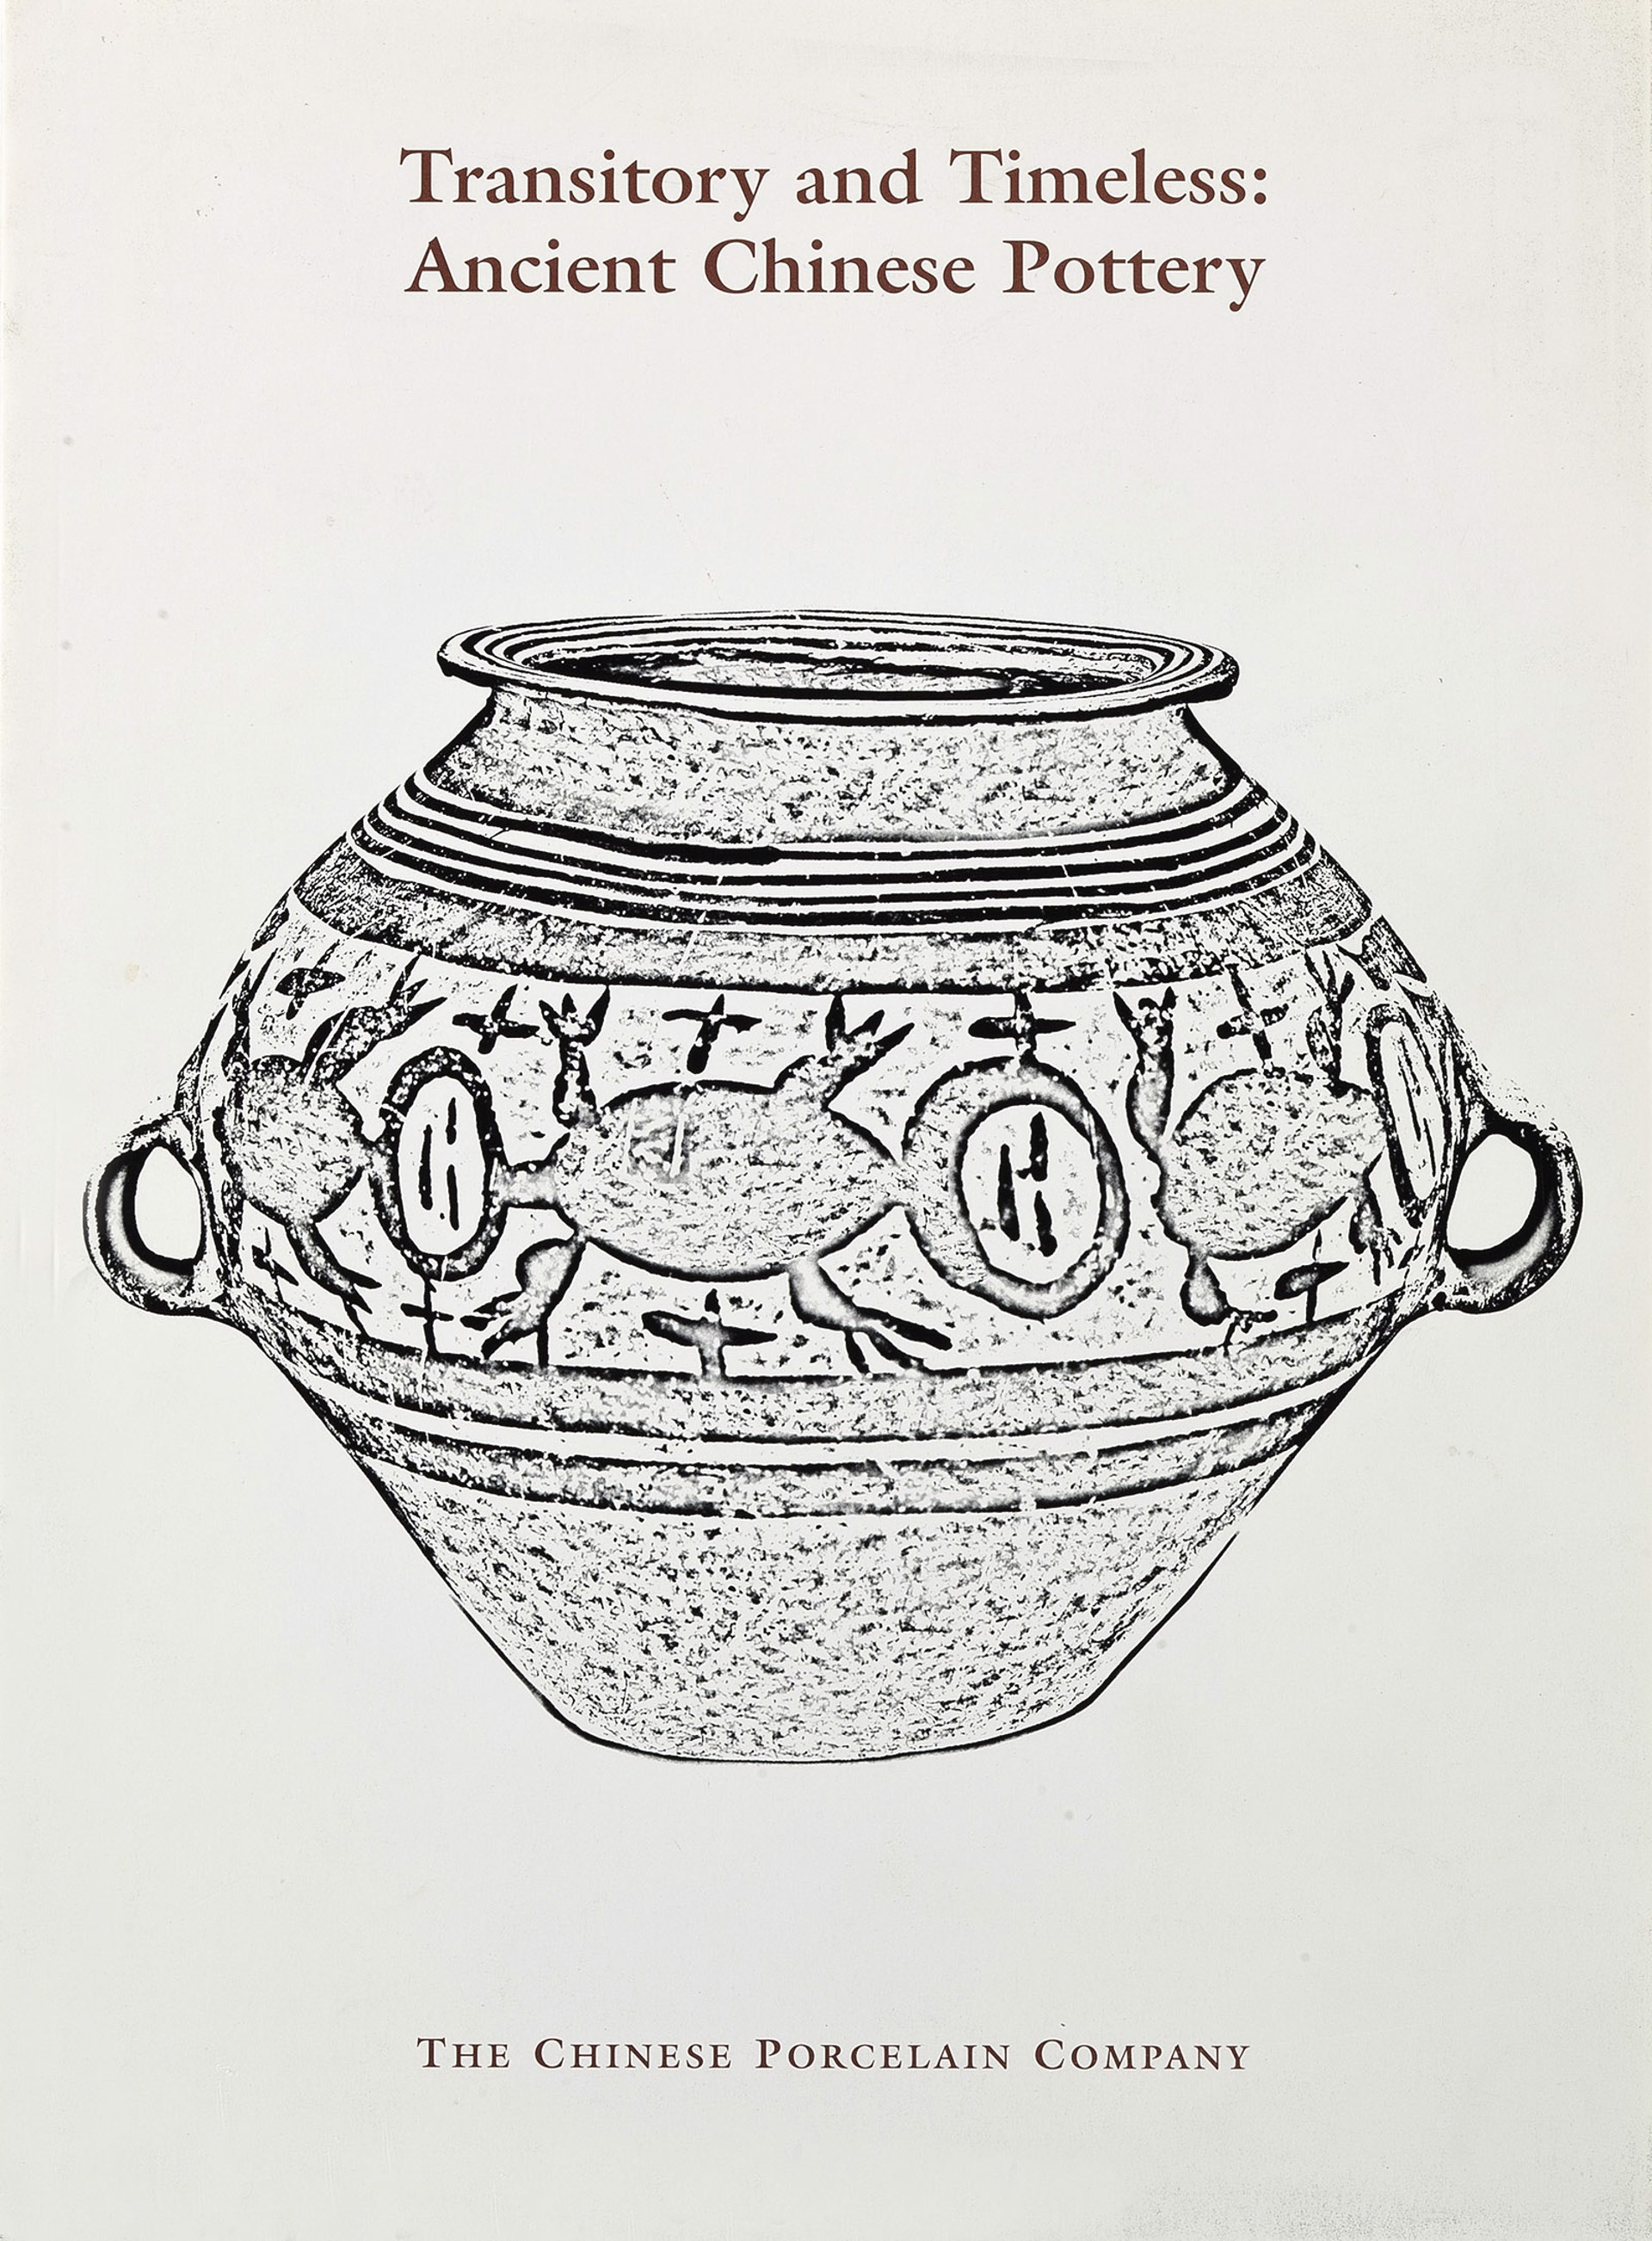 Transitory and Timeless: Ancient Chinese Pottery by Catalog 37